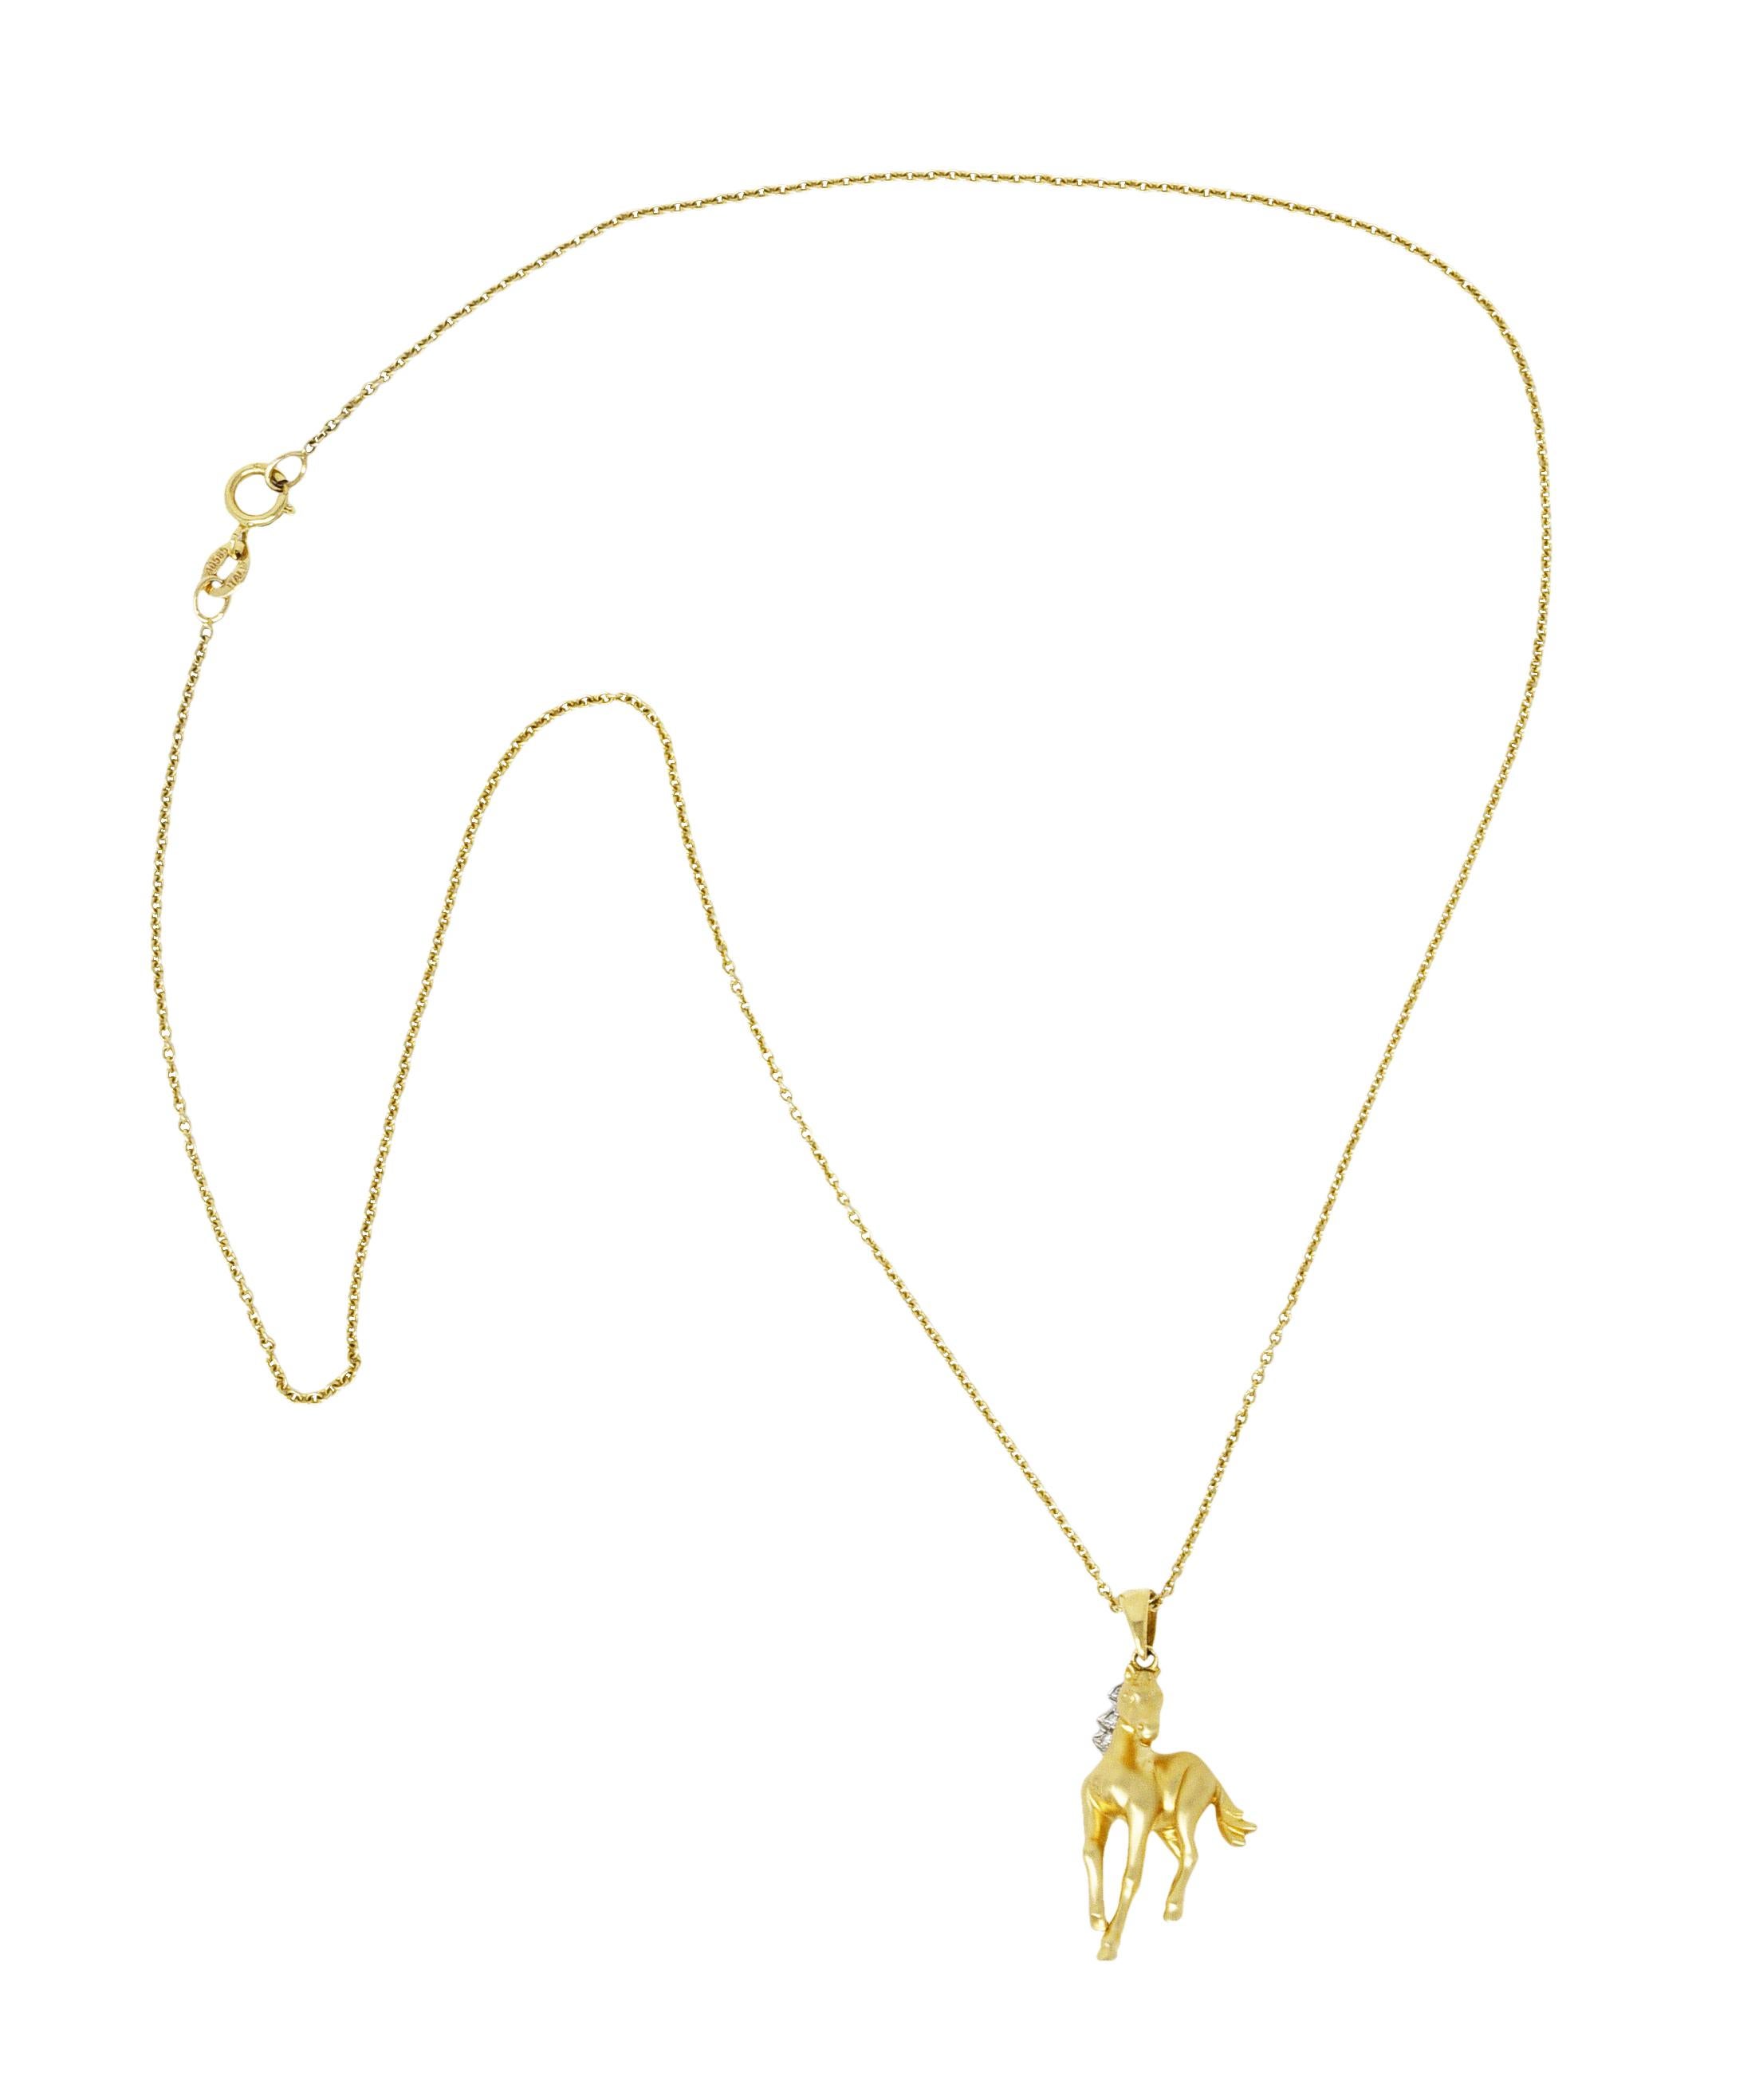 Necklace is designed as cable chain suspending stylized horse pendant

With sleek features and matte gold finish

Mane is accented by round brilliant cut diamonds bead set in white gold

Weighing approximately 0.03 carat total - eye clean and